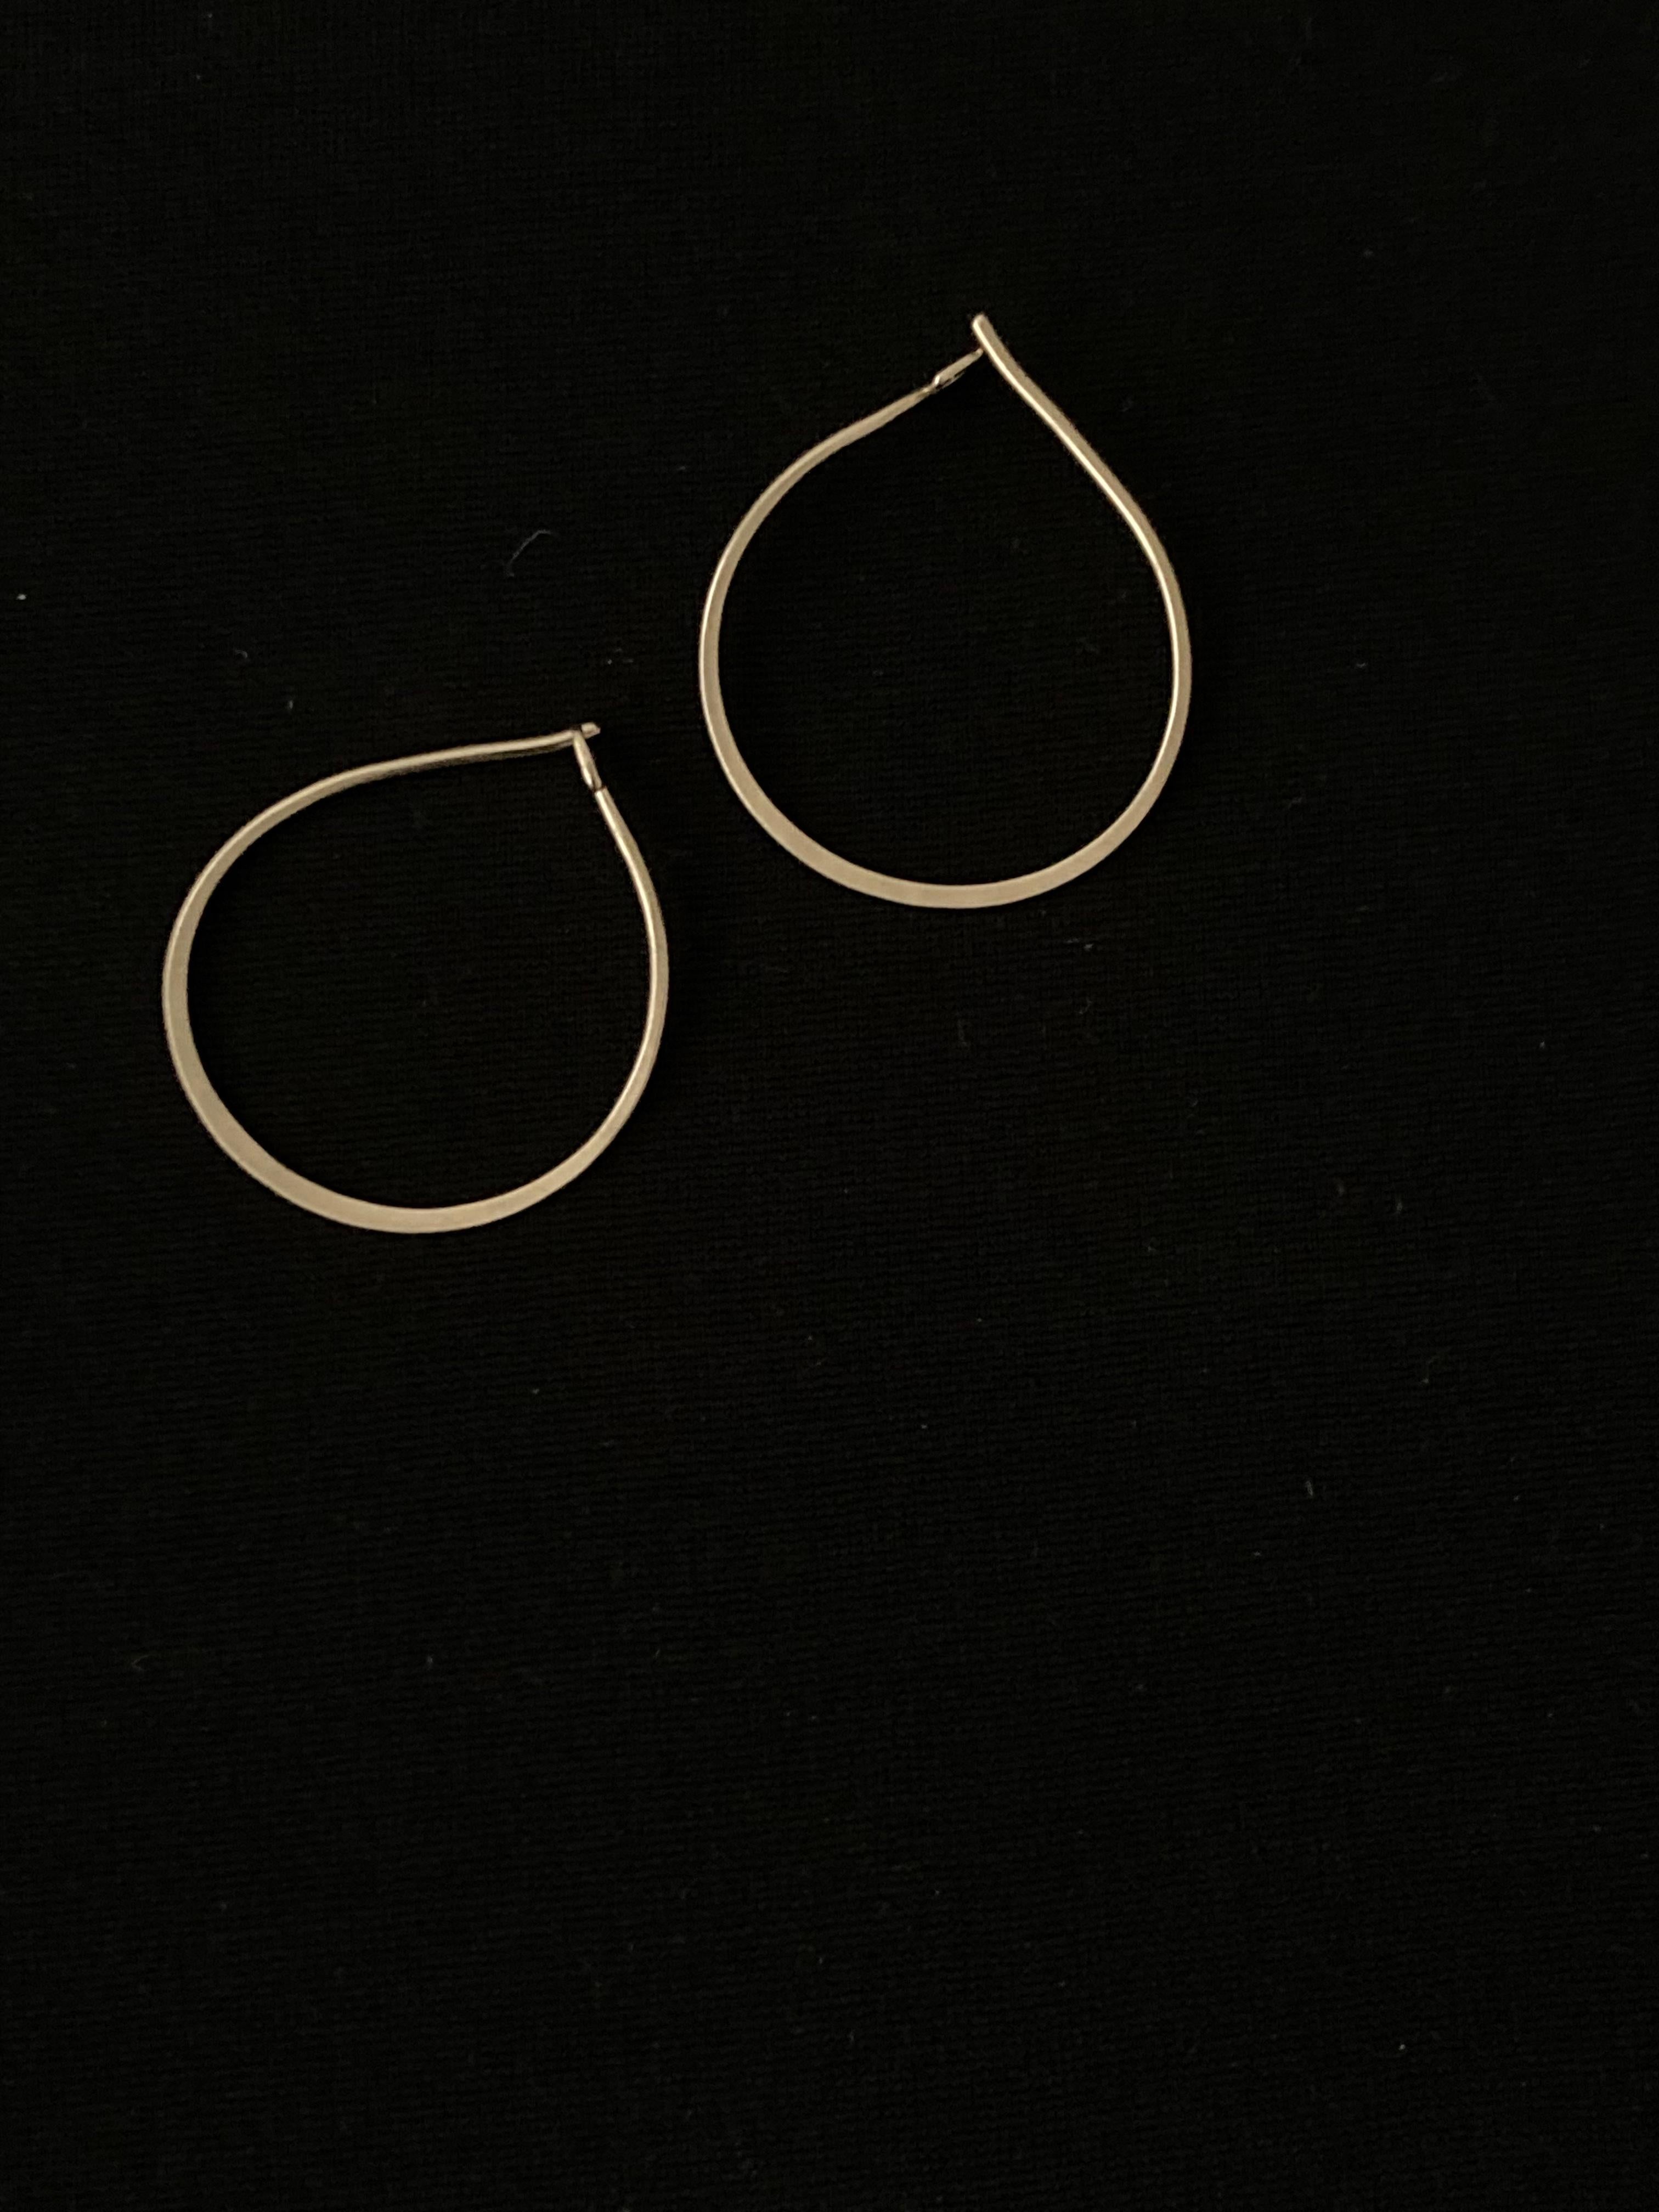 Solid 9ct Gold clicker hoops- these simple but luxury earrings are forged from a single piece of wire, and are tensioned so that they snap closed with a satisfying ‘click’.

Because the gold is hardened they are very securely fastened when worn,